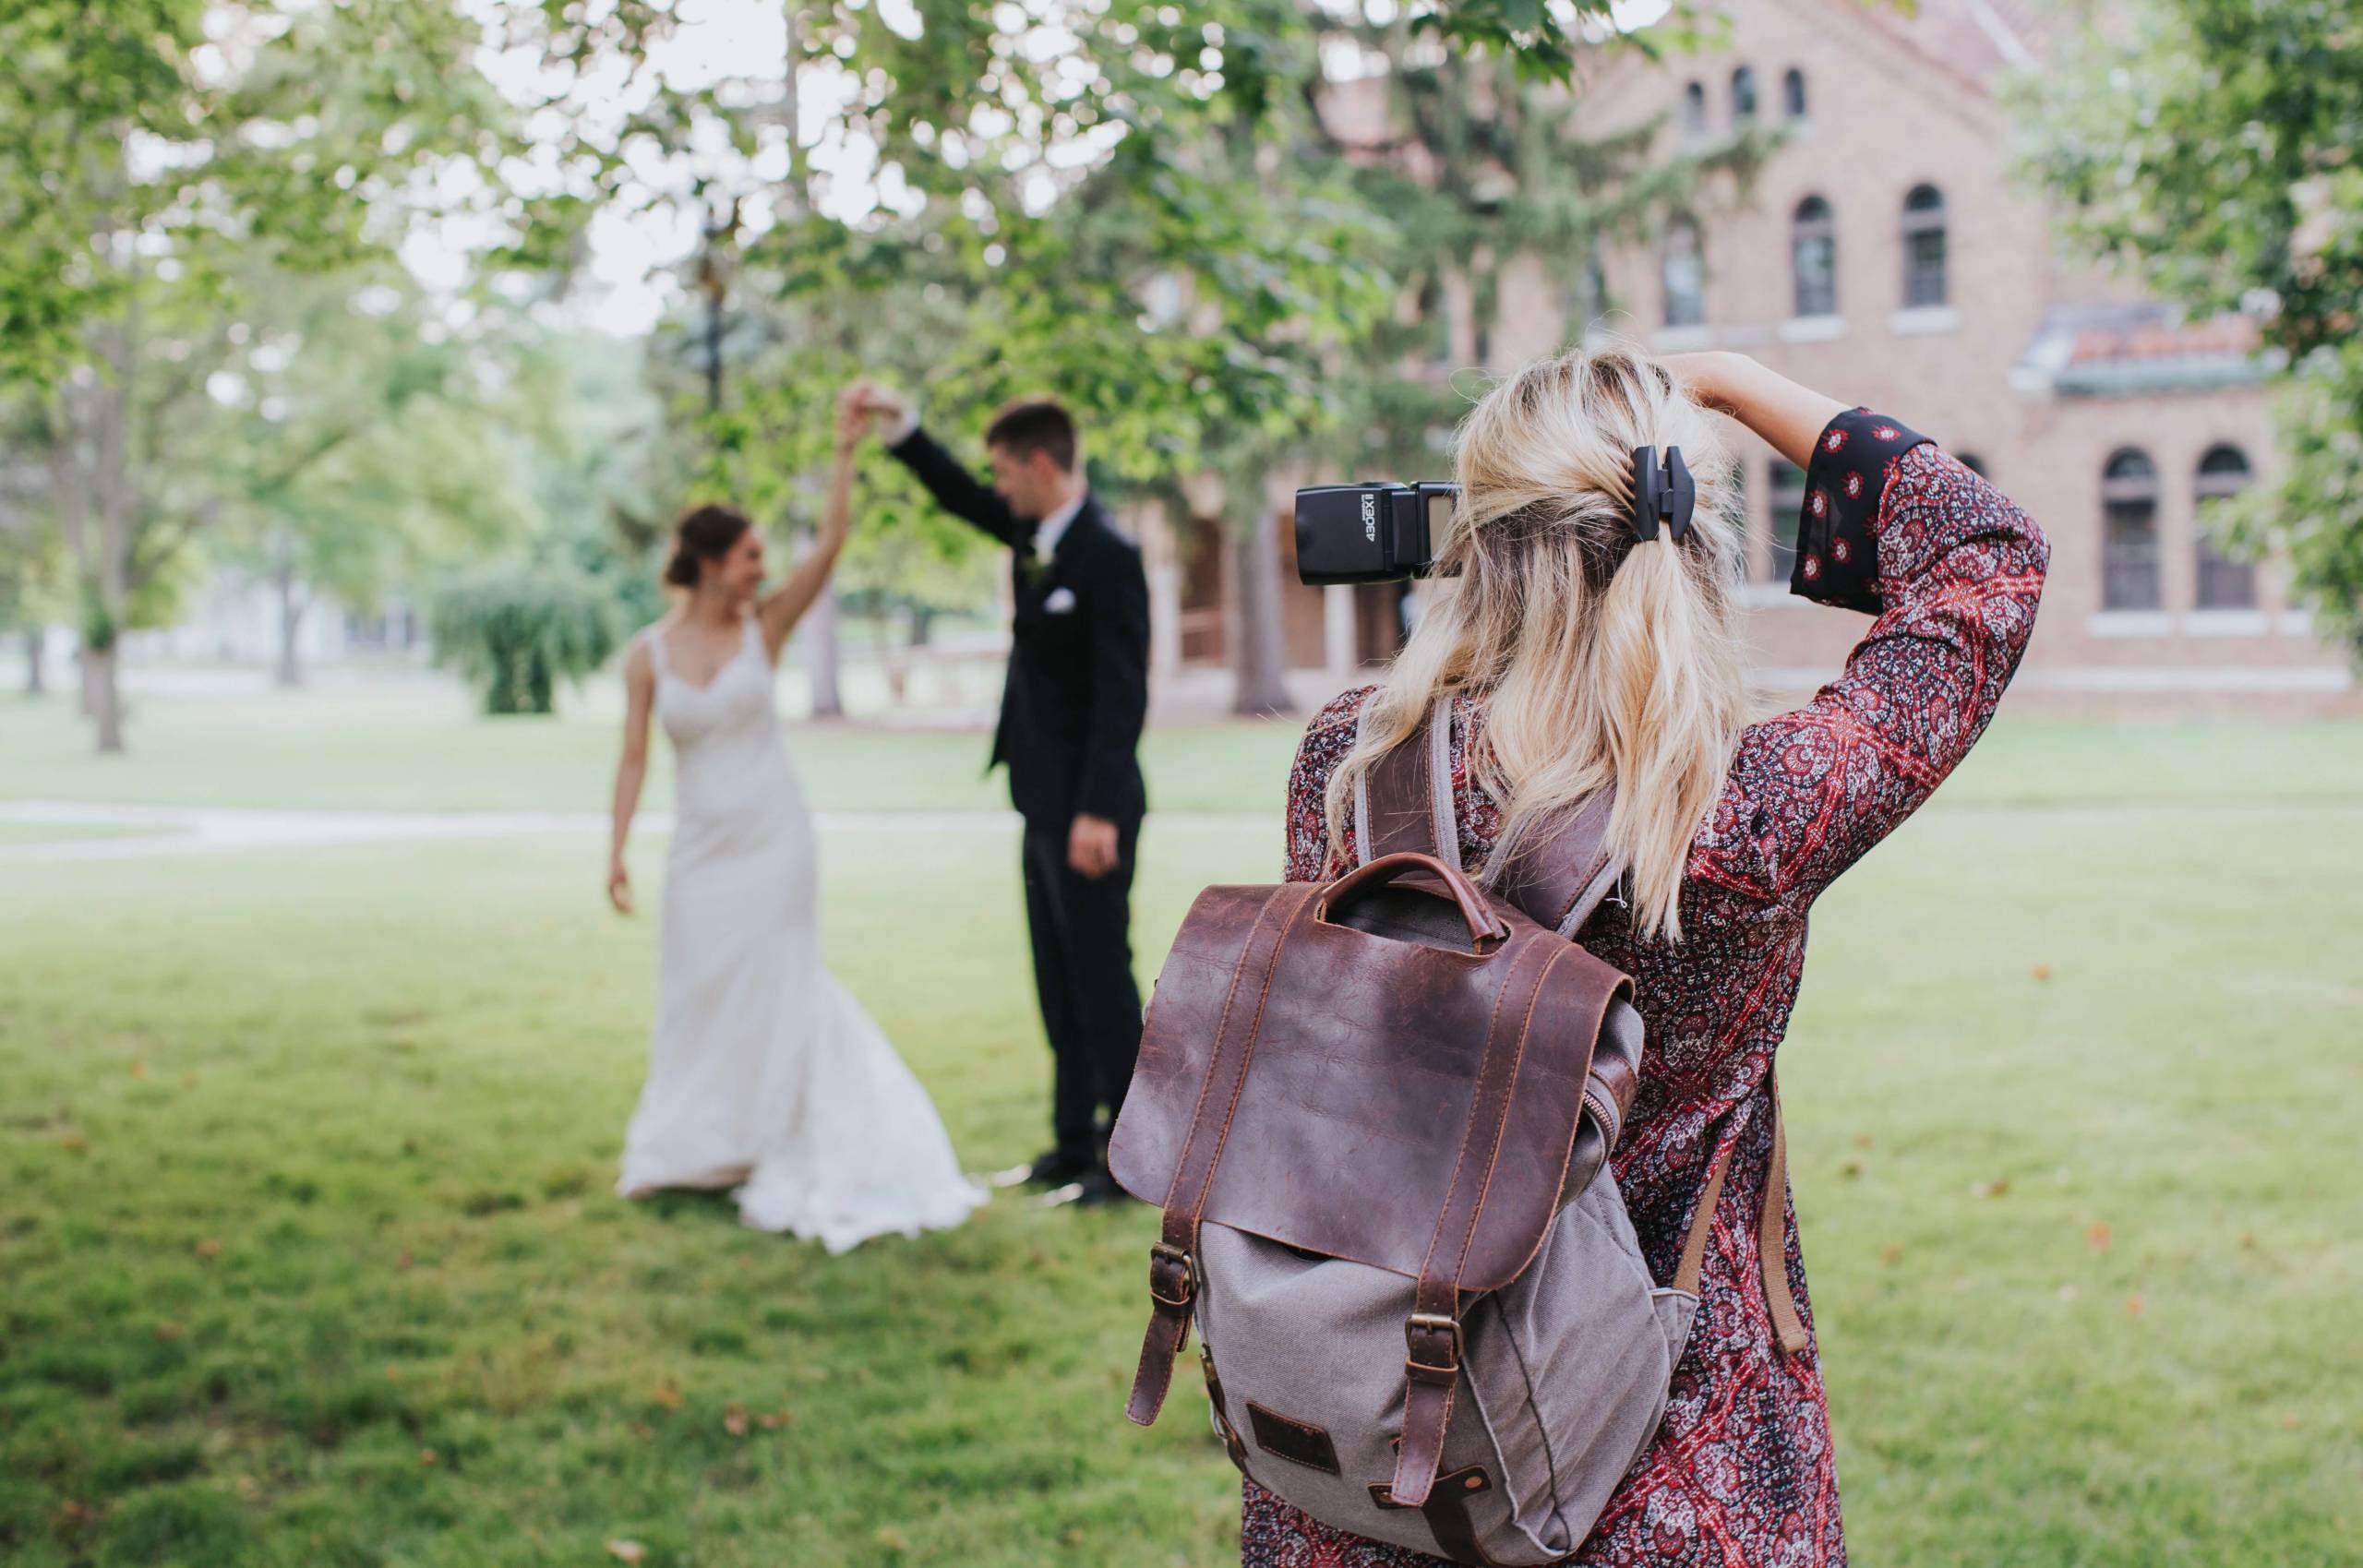 seo for wedding photographers can increase website traffic